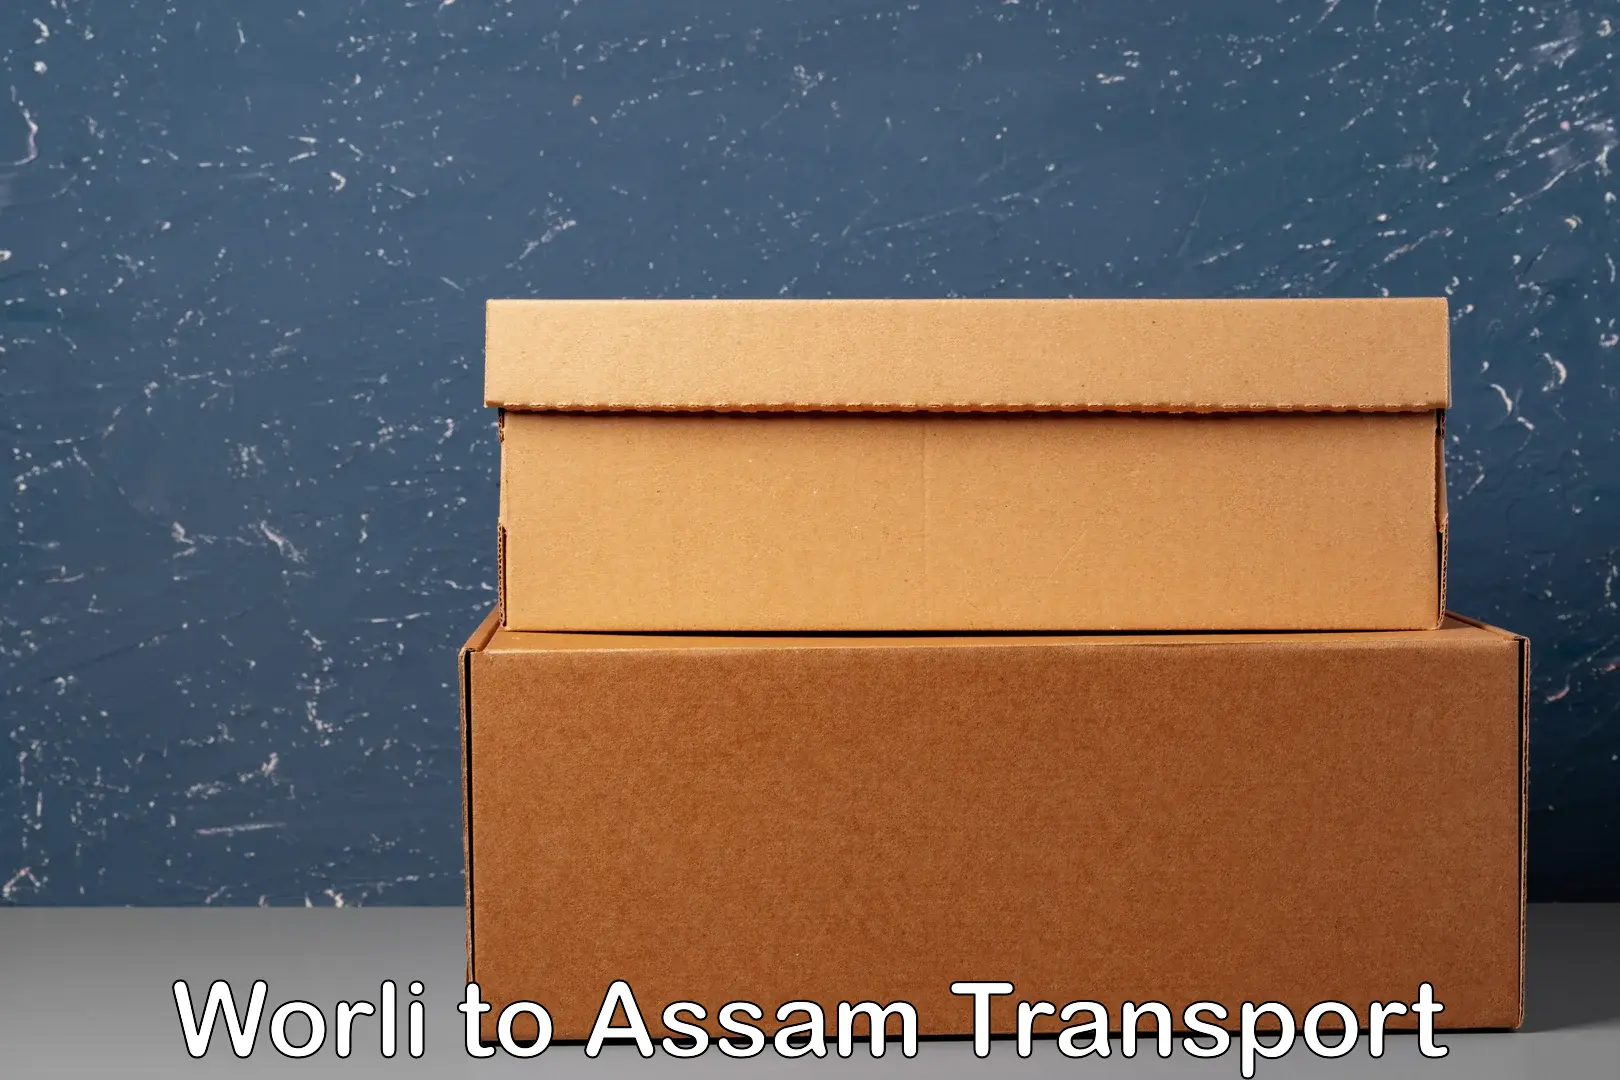 Air freight transport services Worli to Sonitpur